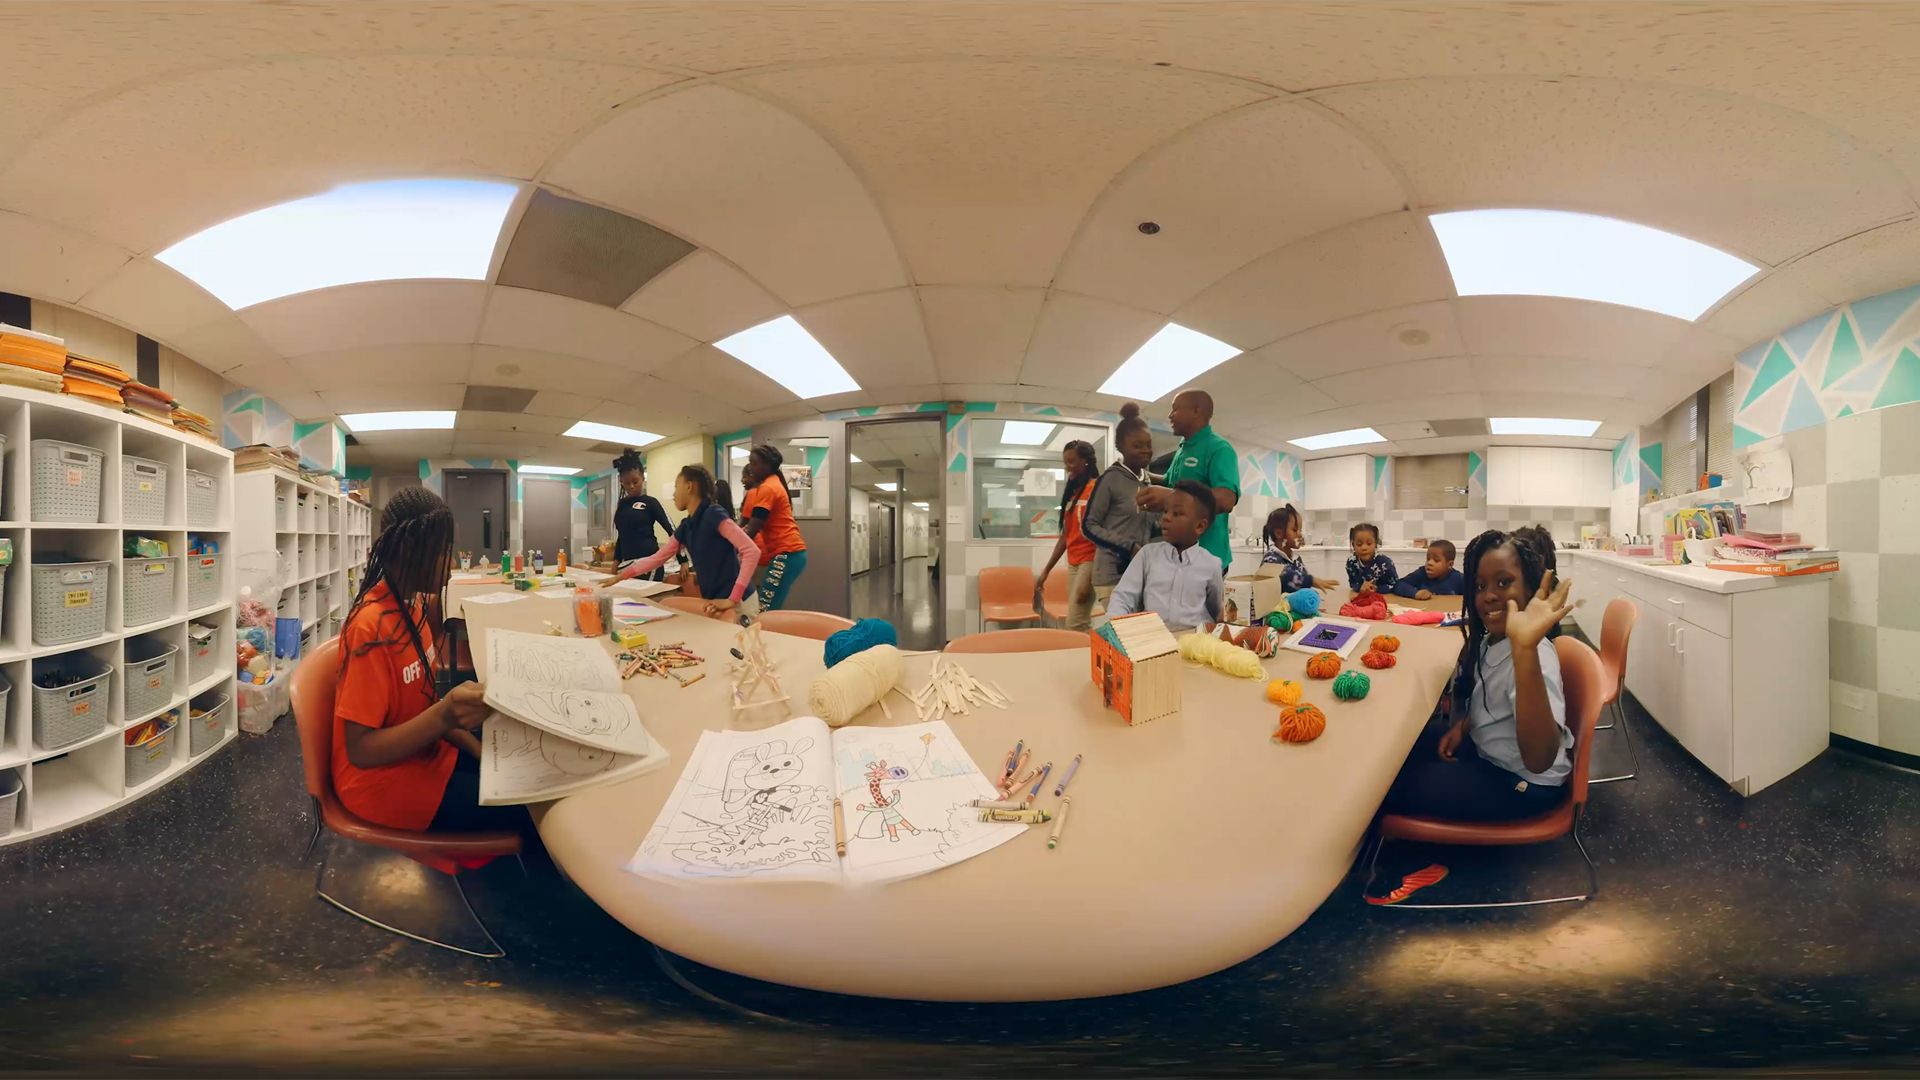 360 panoramic shot of a library full of children doing crafts